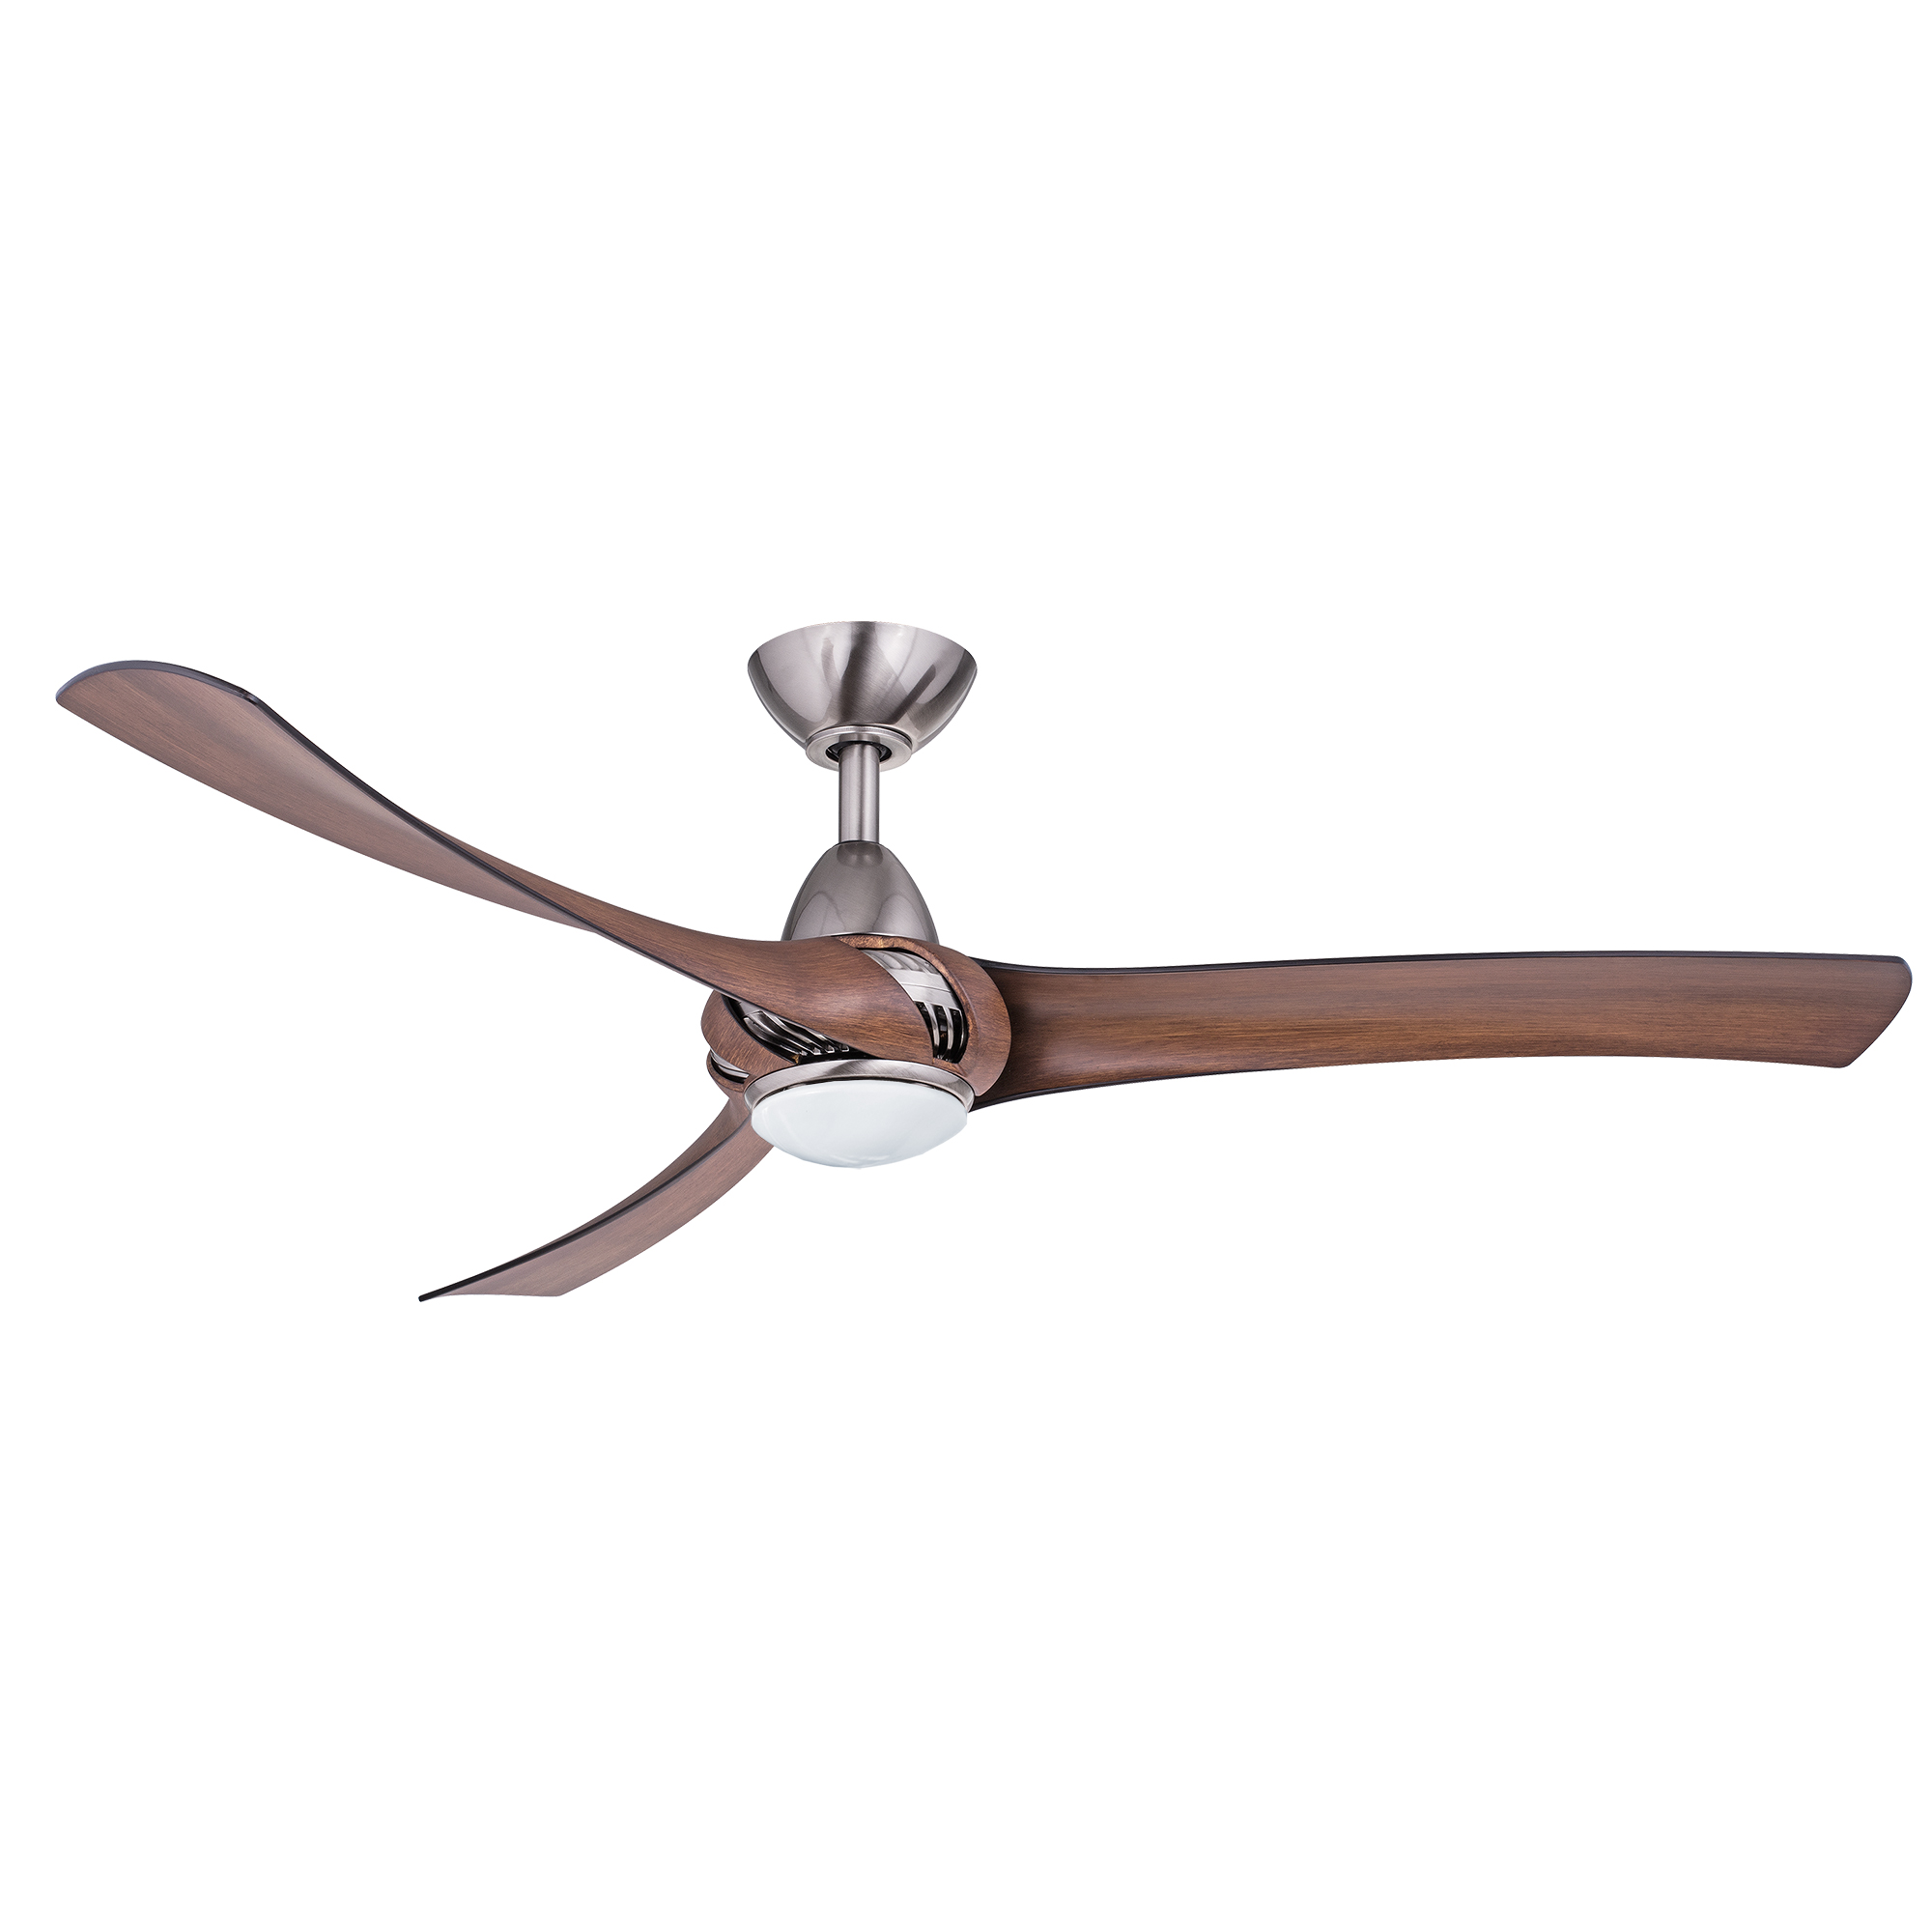 52" Arumi Ceiling Fan in Pewter with Koa blades and 17W LED Light